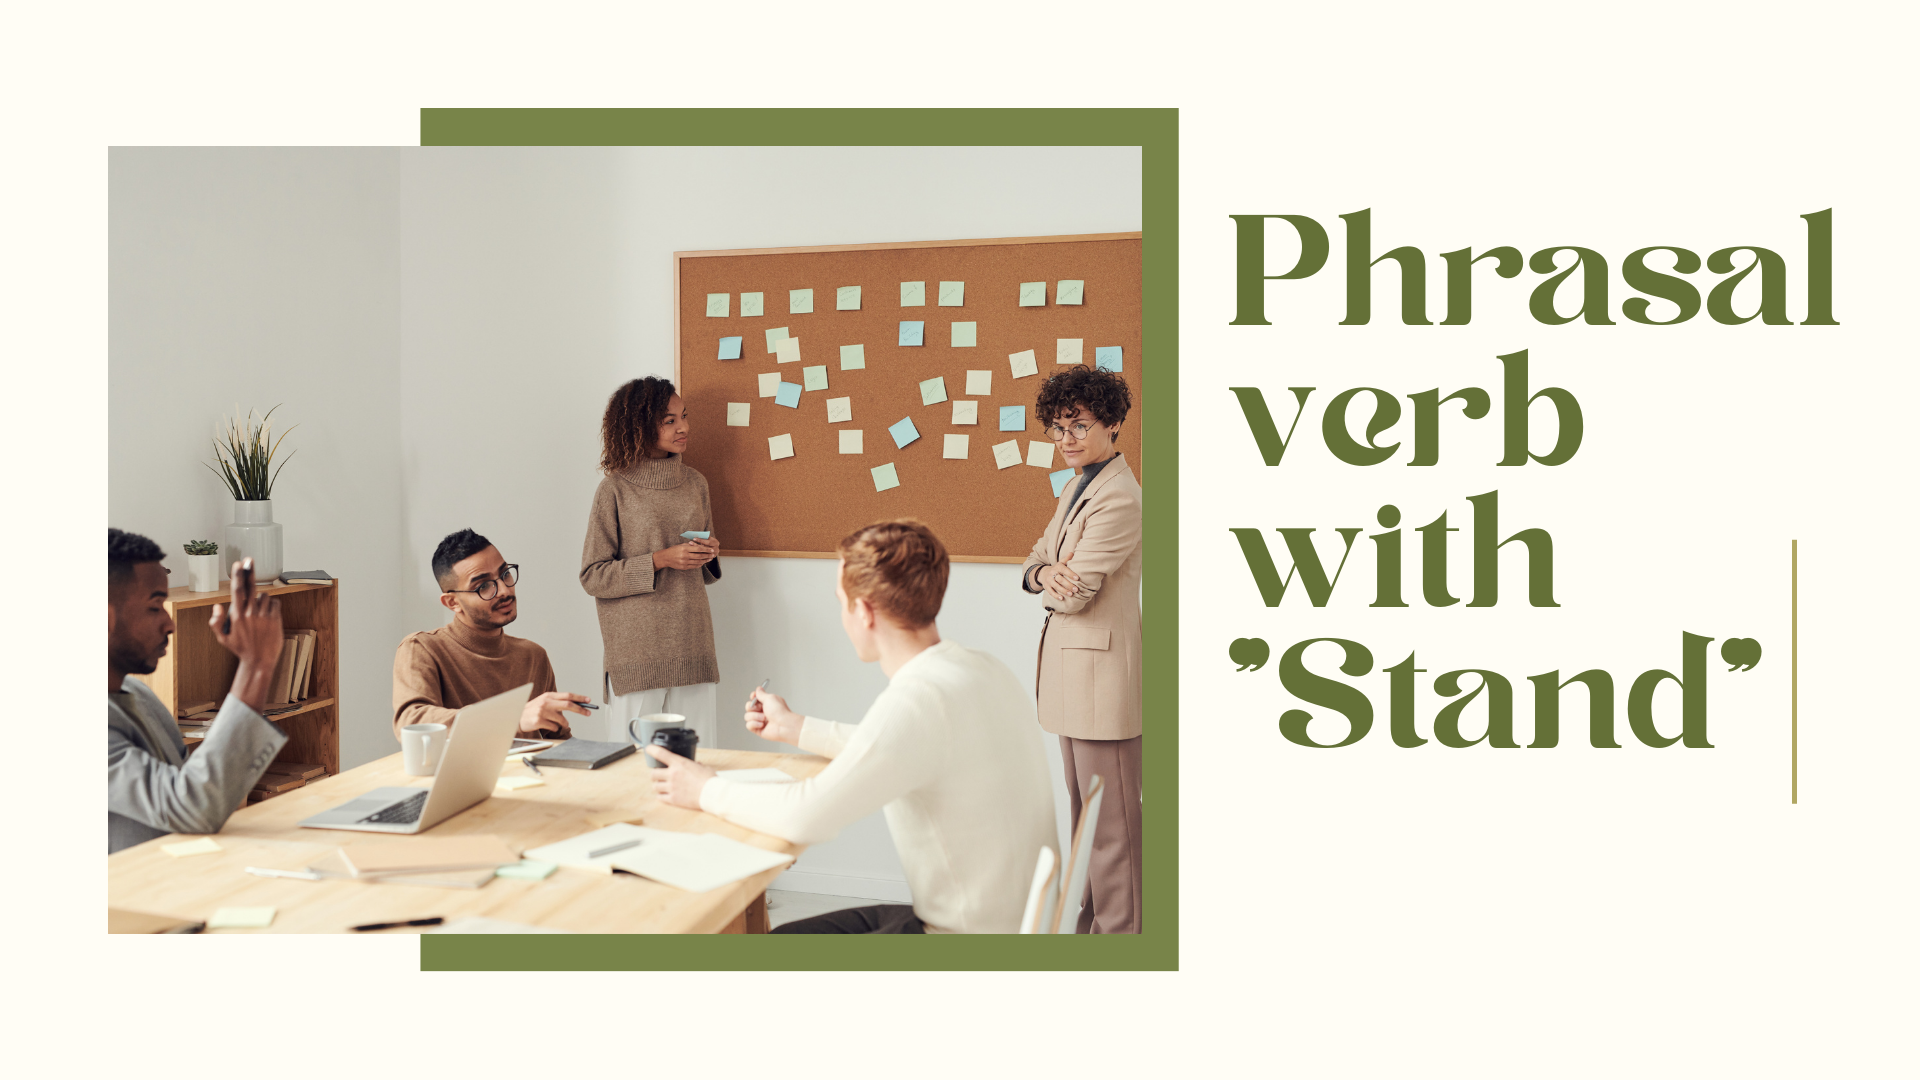 Phrasal verb with stand, từ vựng tiếng Anh